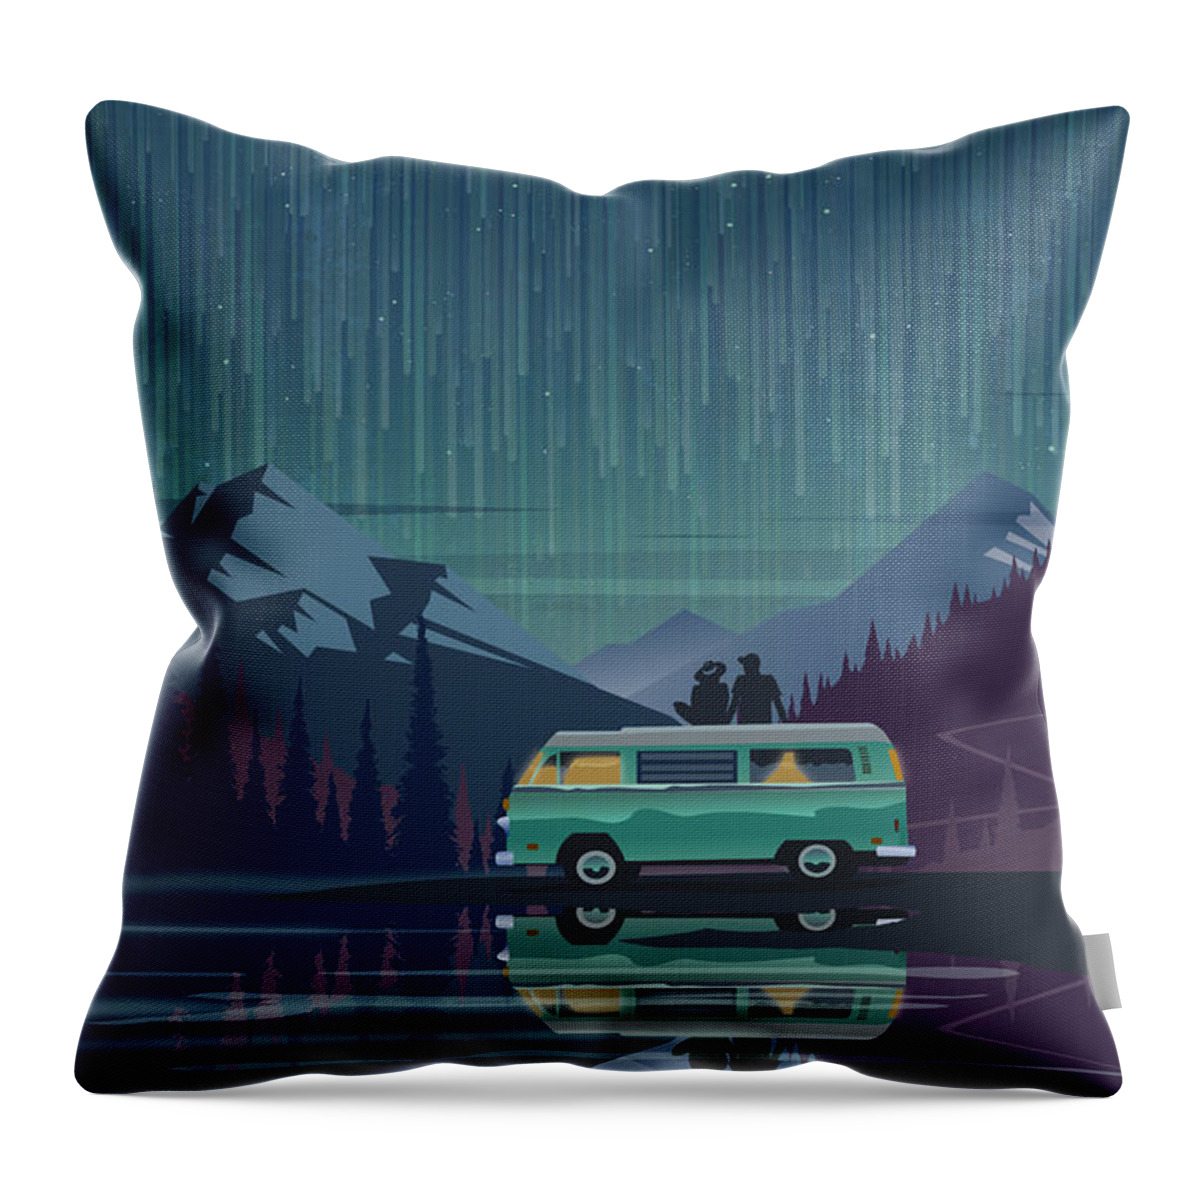 Vanlife Throw Pillow featuring the painting Star light vanlife by Sassan Filsoof